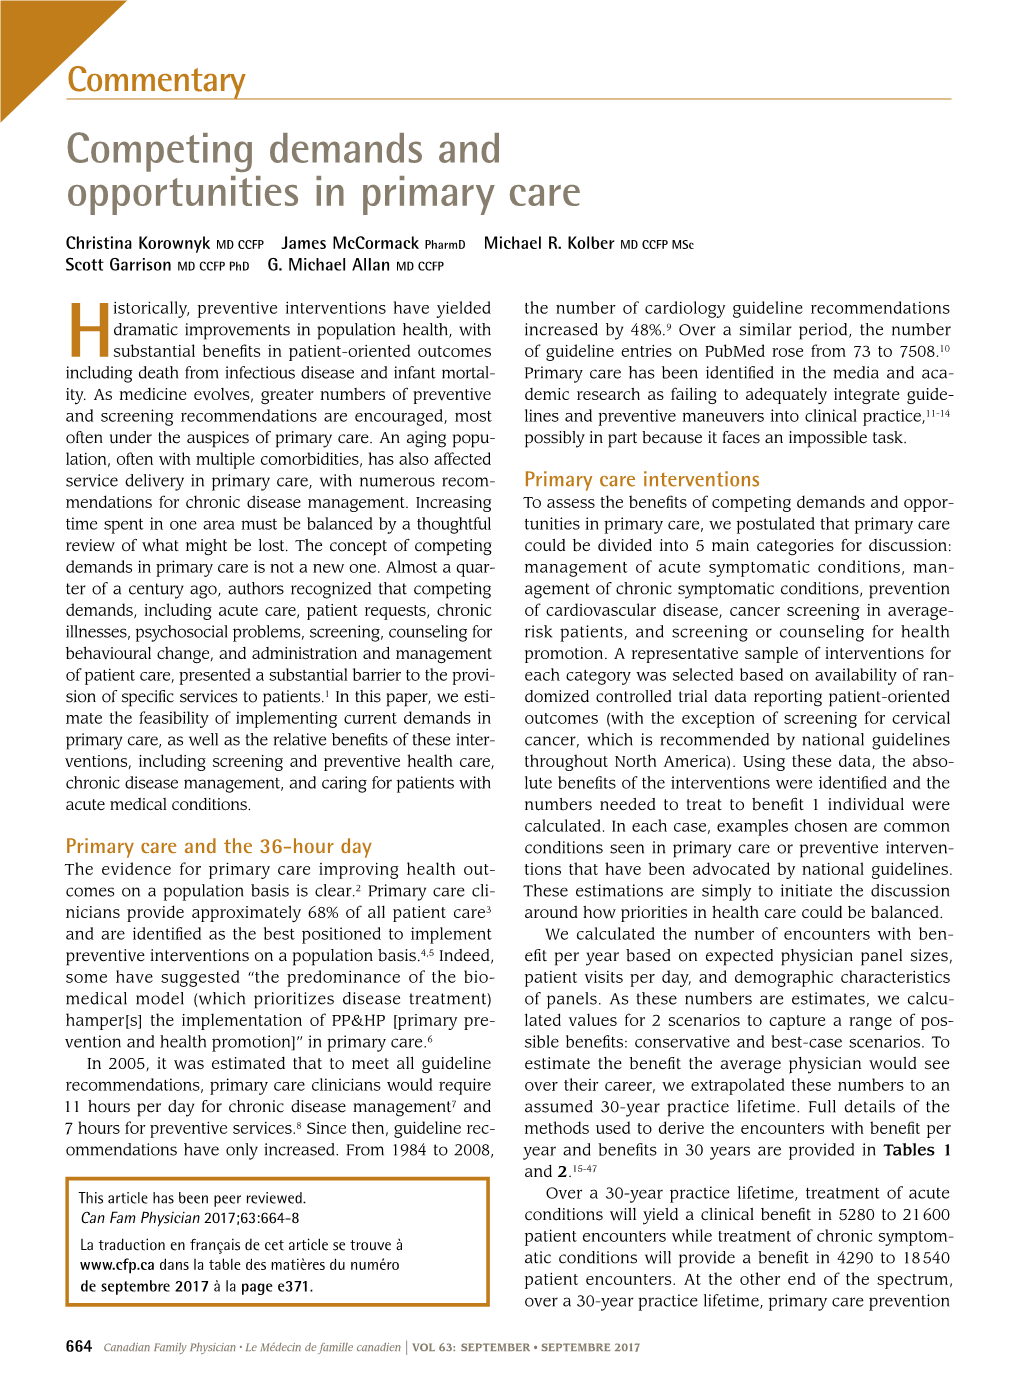 Competing Demands and Opportunities in Primary Care